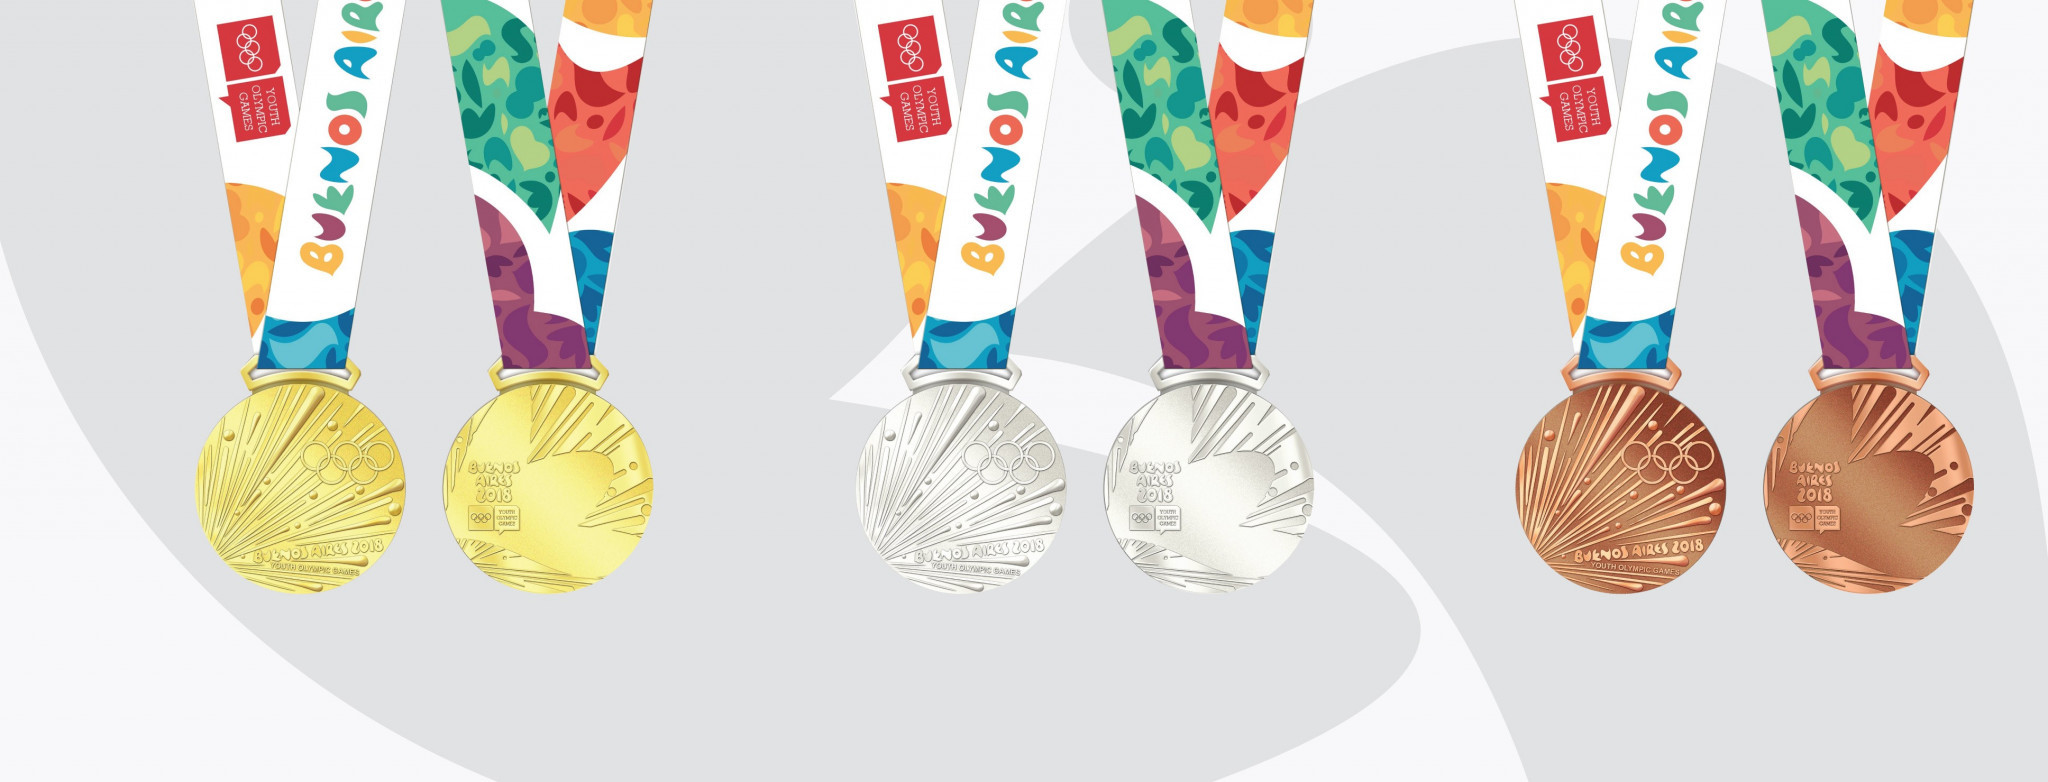 Design of medals to be awarded at Buenos Aires 2018 completed